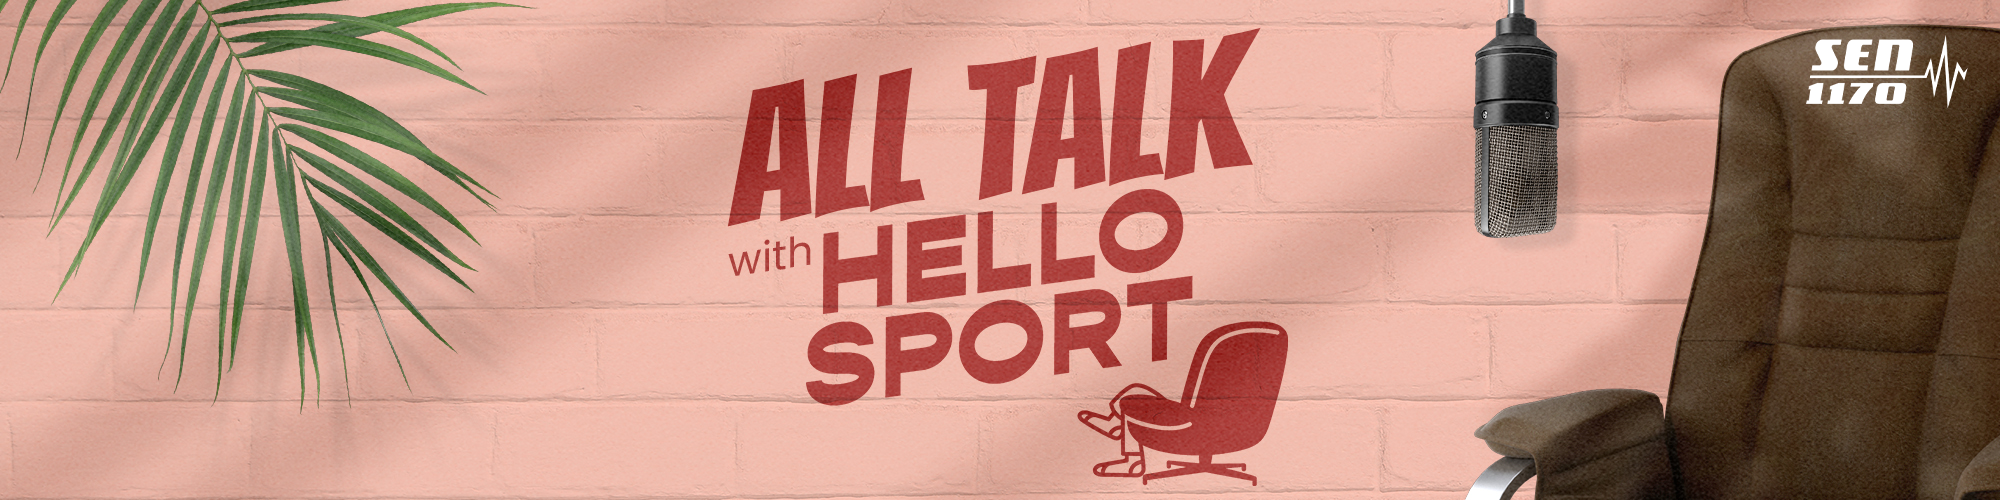 All Talk with Hello Sport (2000x500)1170